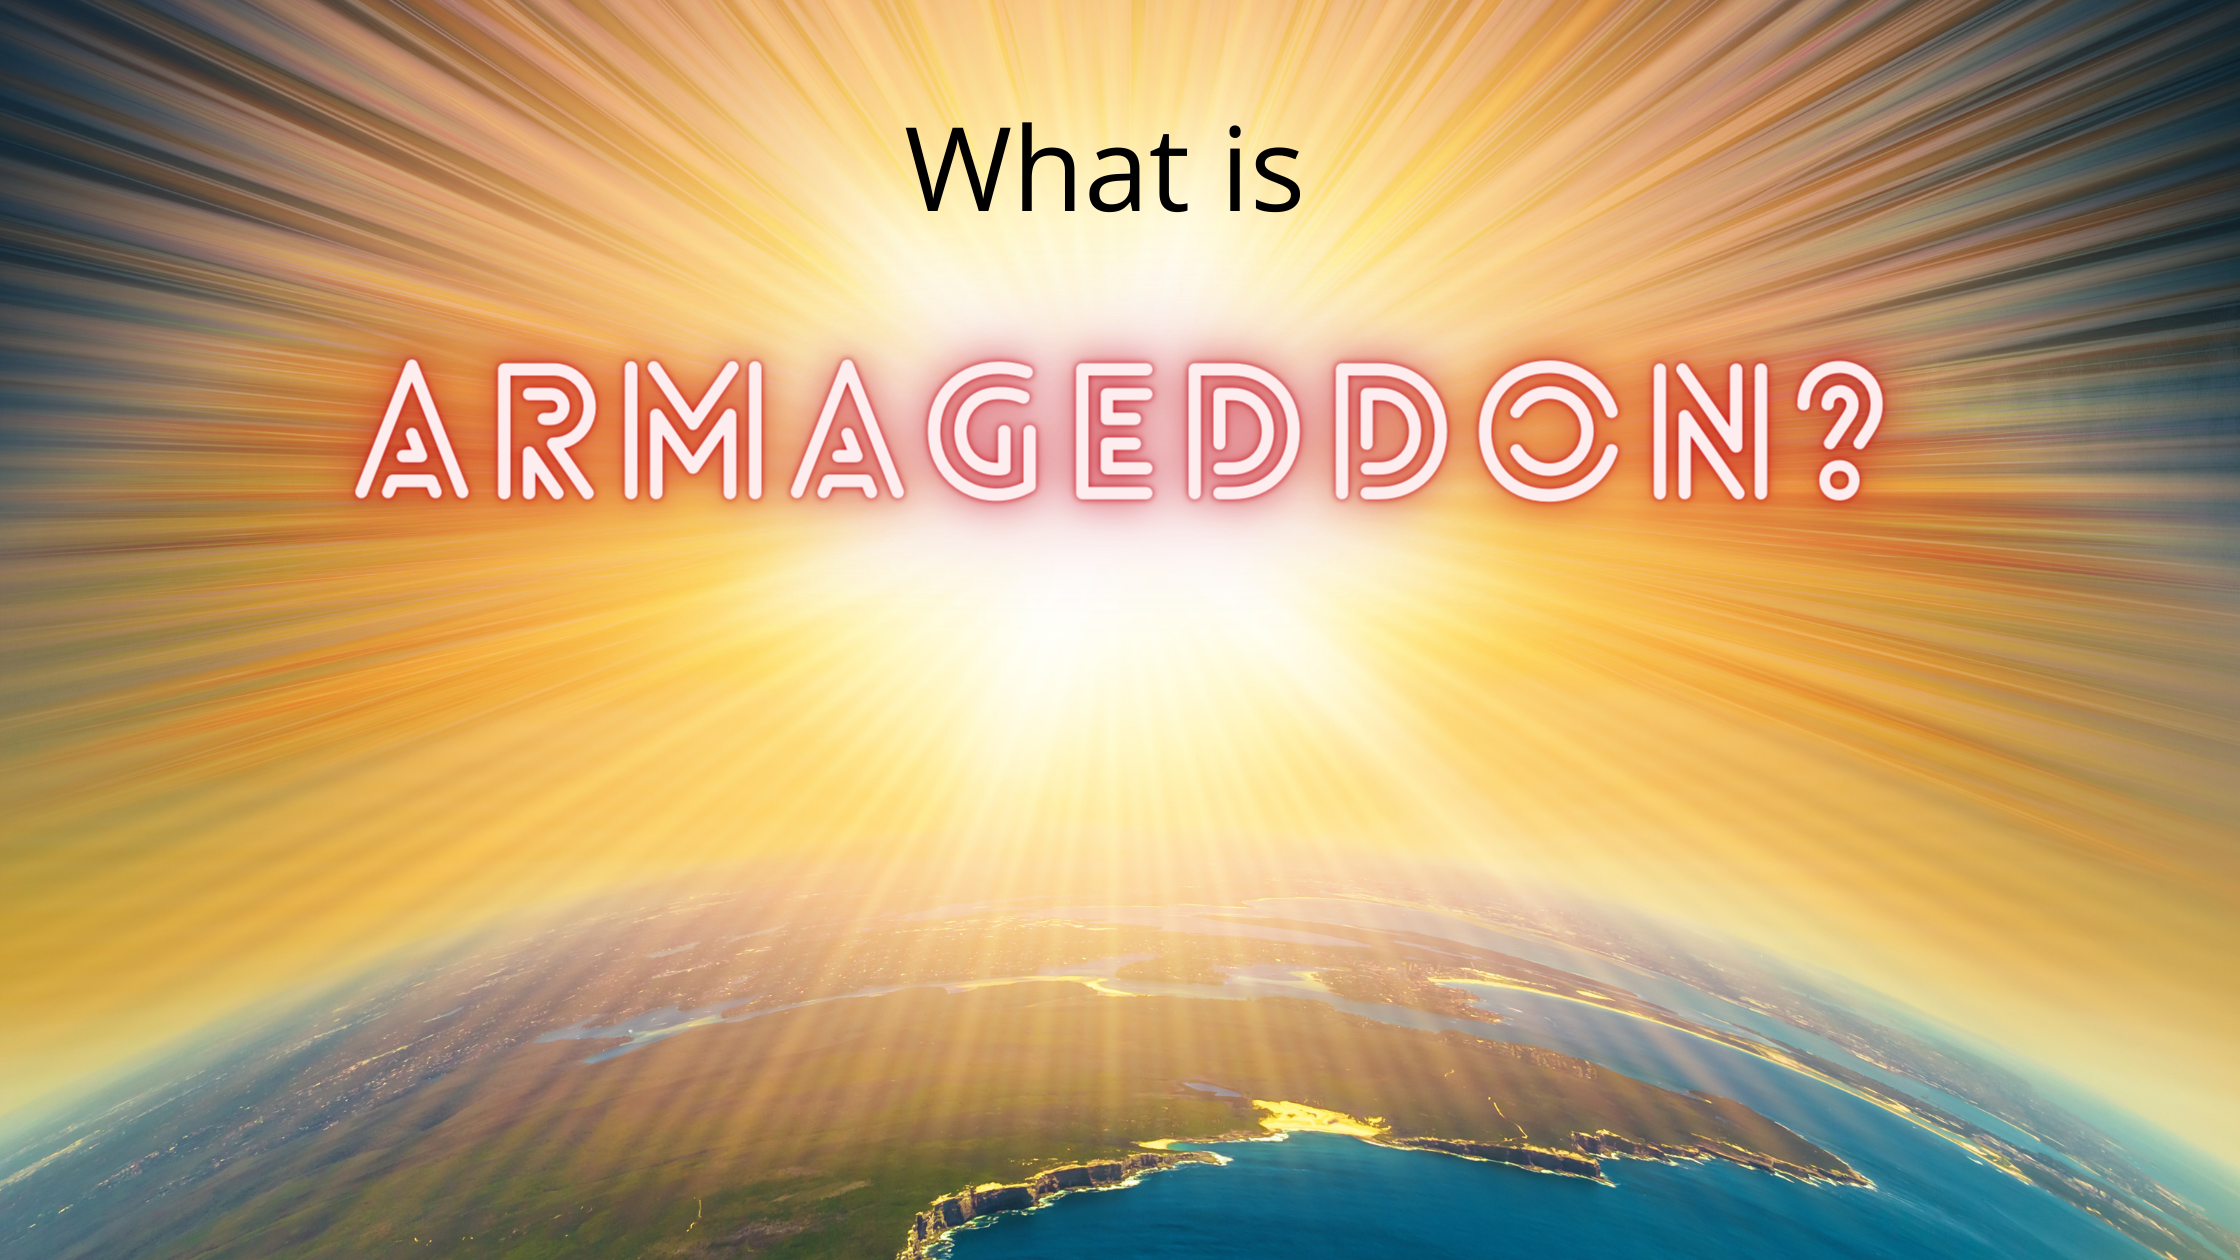 What is Armageddon?